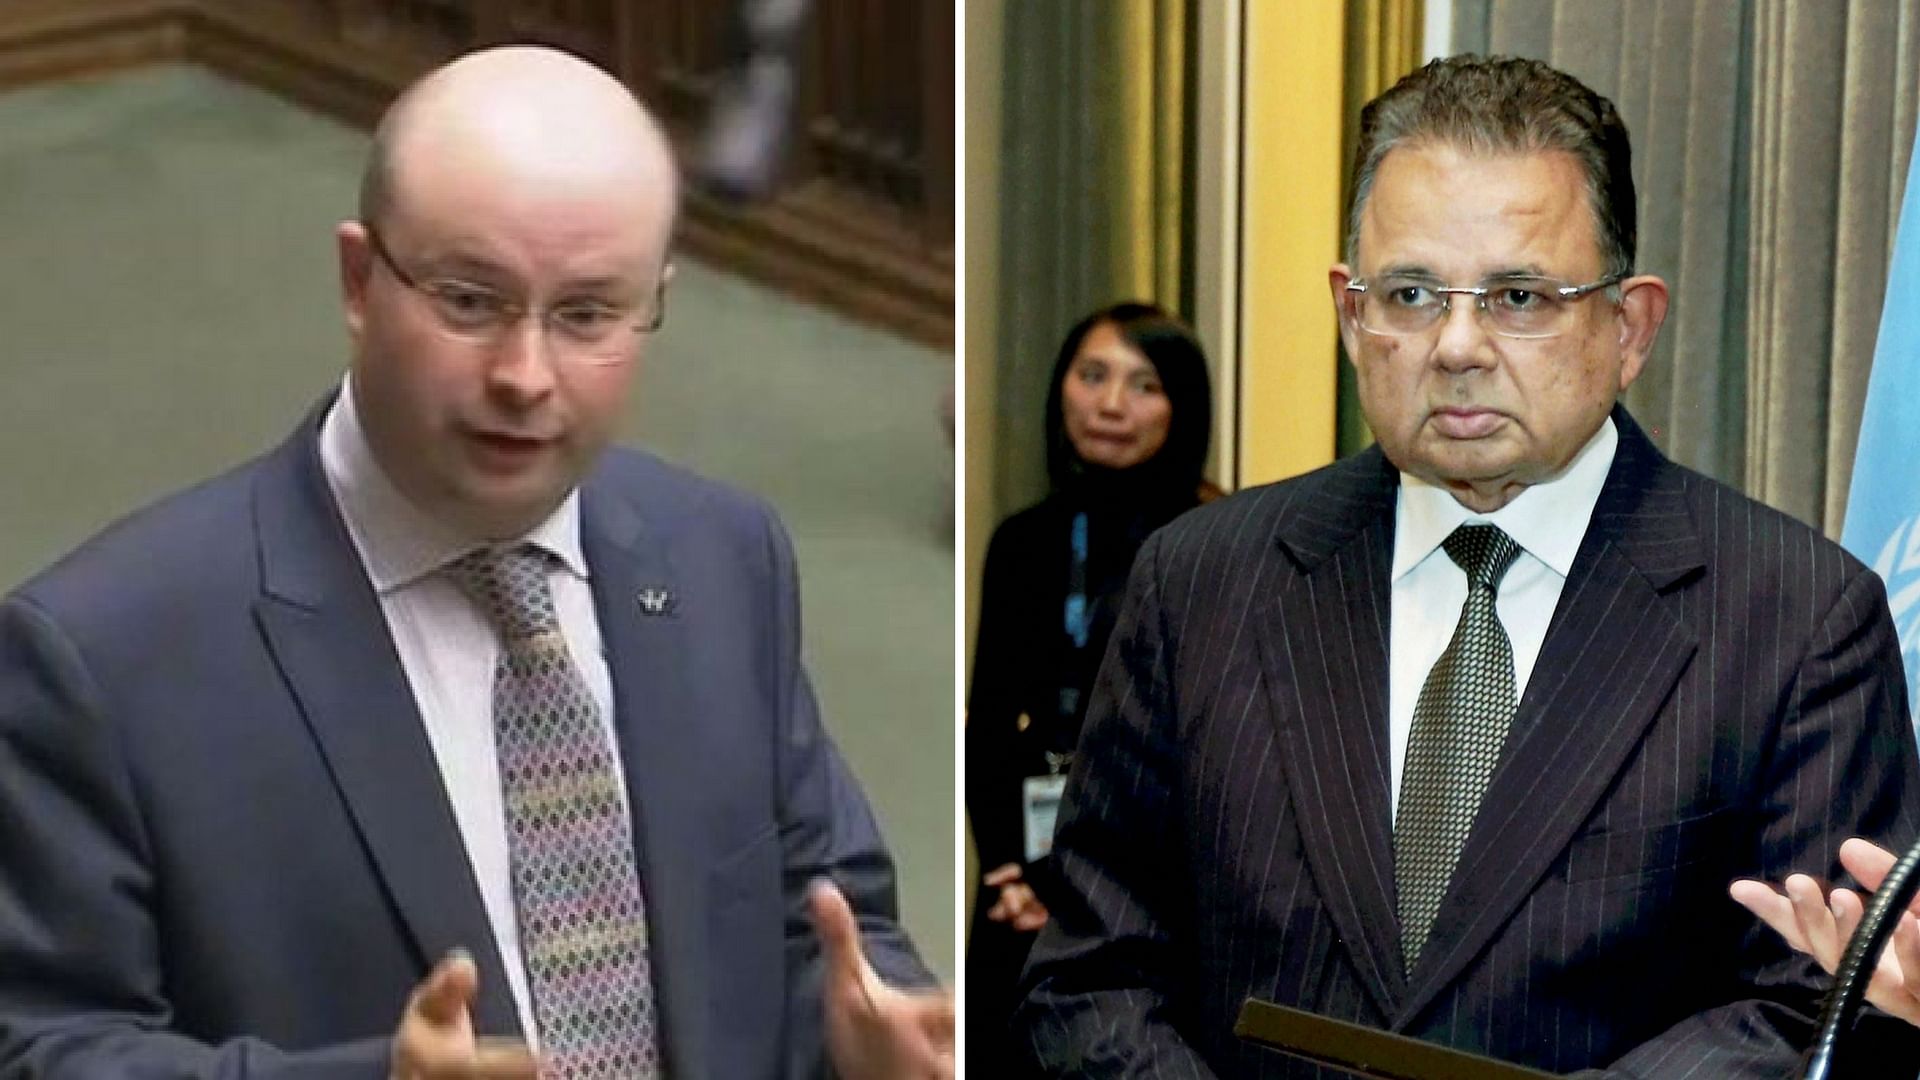 SNP MP Patrick Grady (L) brought up Indian judge Dalveer Bhandari’s (R) election to the ICJ after UK lost its seat.